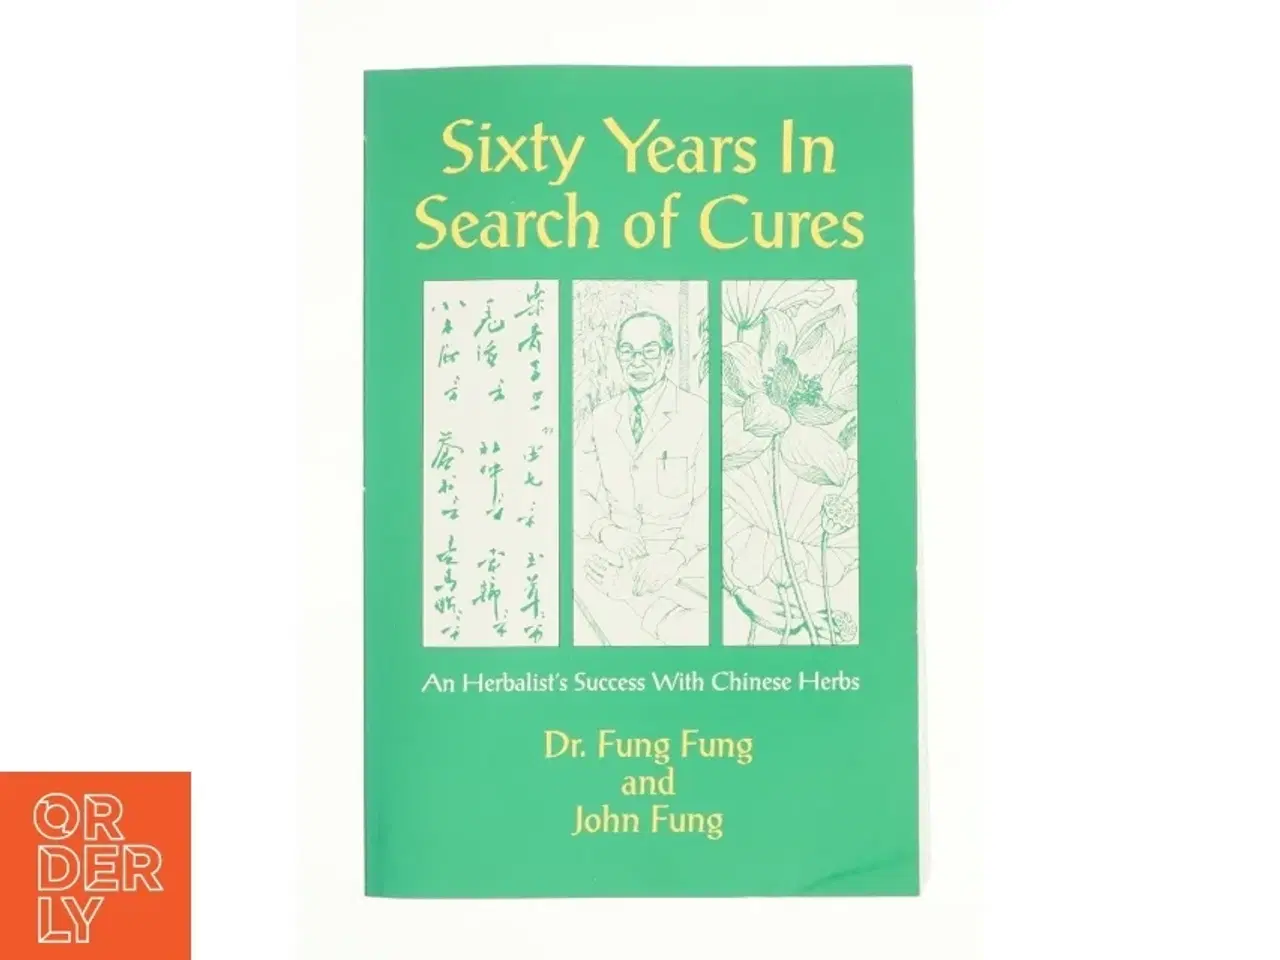 Billede 1 - Sixty Years in Search of Cures af Dr. Fung Fung & John Fung (Bog)